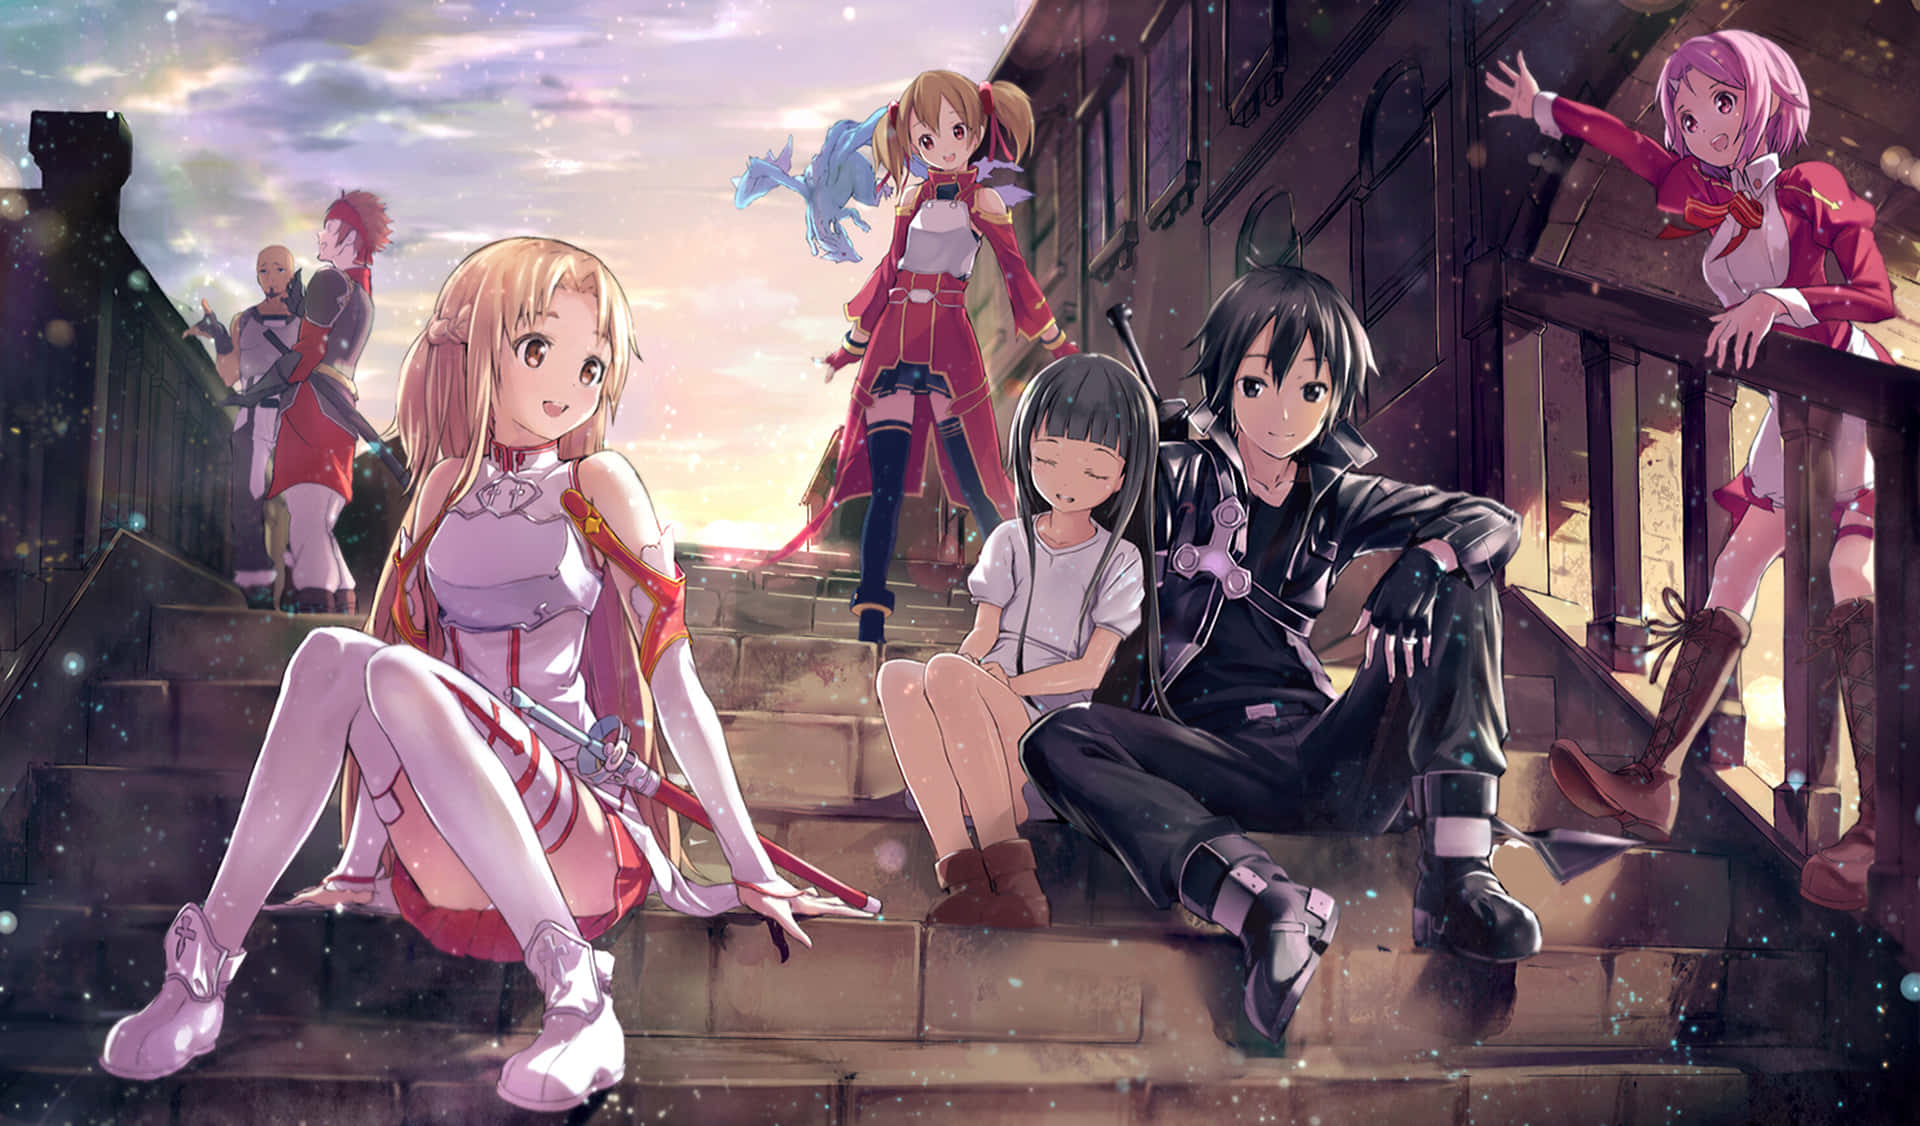 Join the journey with Kirito in the world of Sword Art Online!